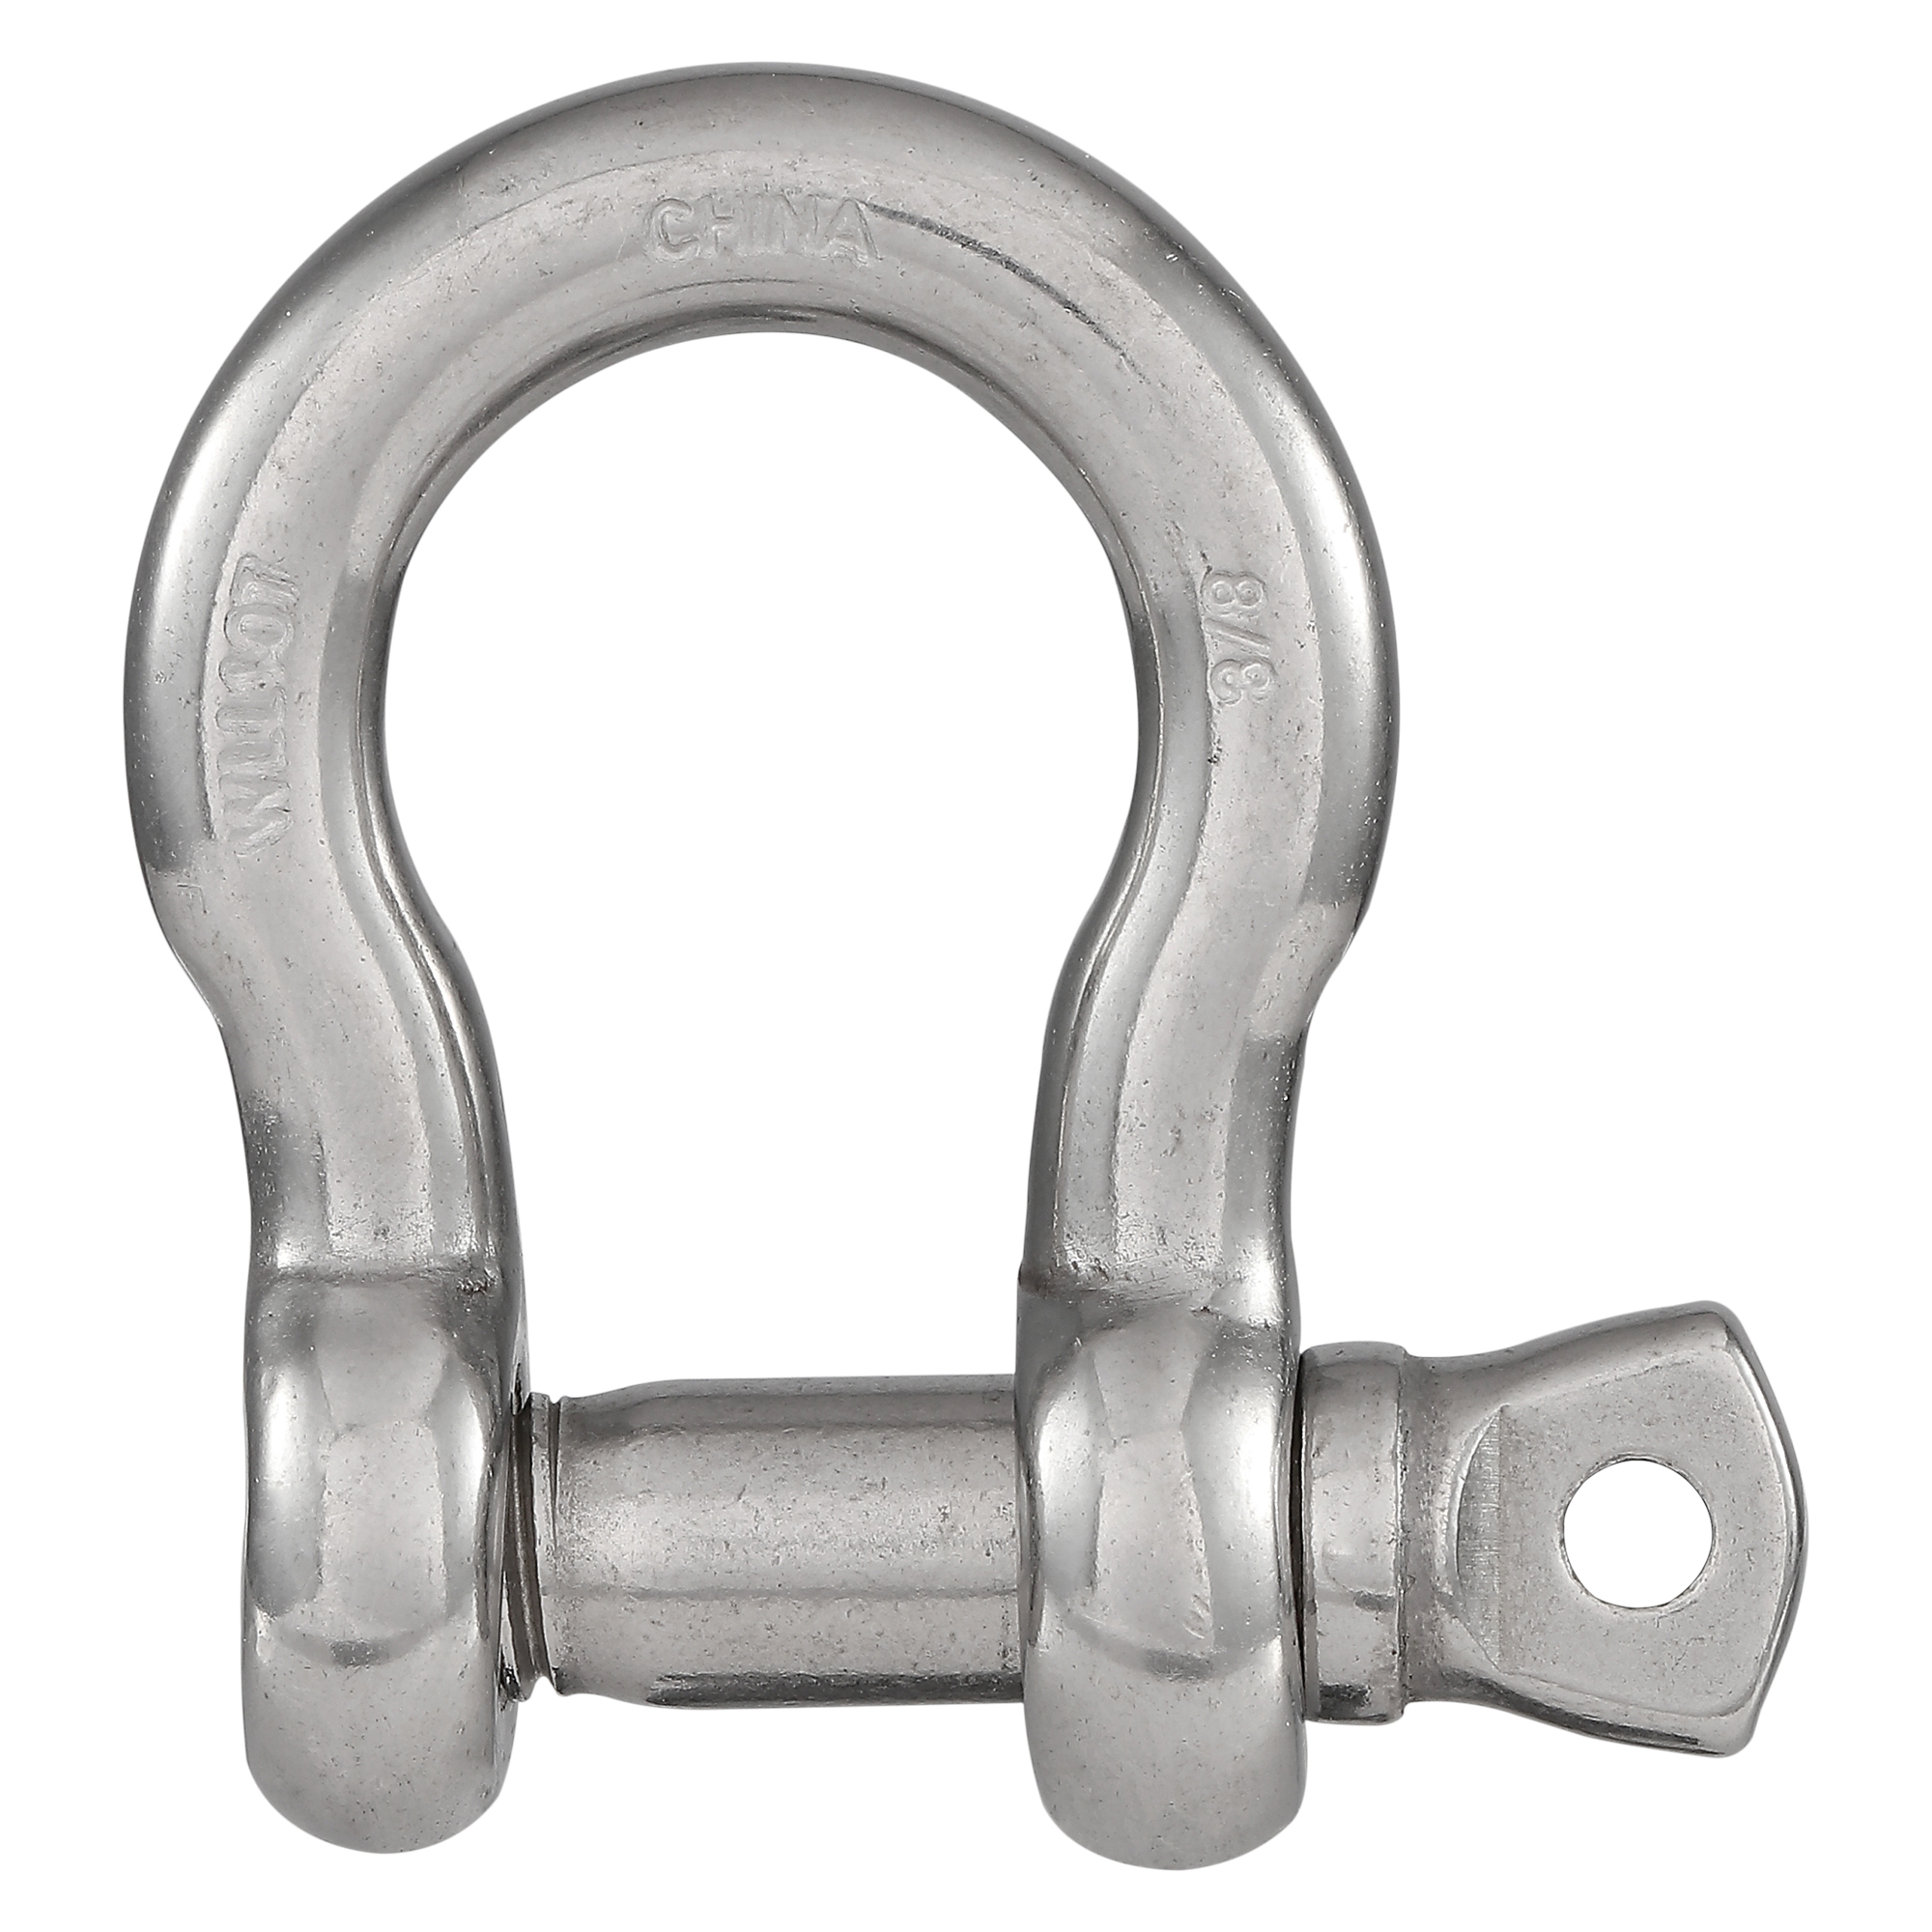 N100-280 Anchor Shackle, 3/8 in Trade, 2200 lb Working Load, 3/8 in Dia Wire, 316 Grade